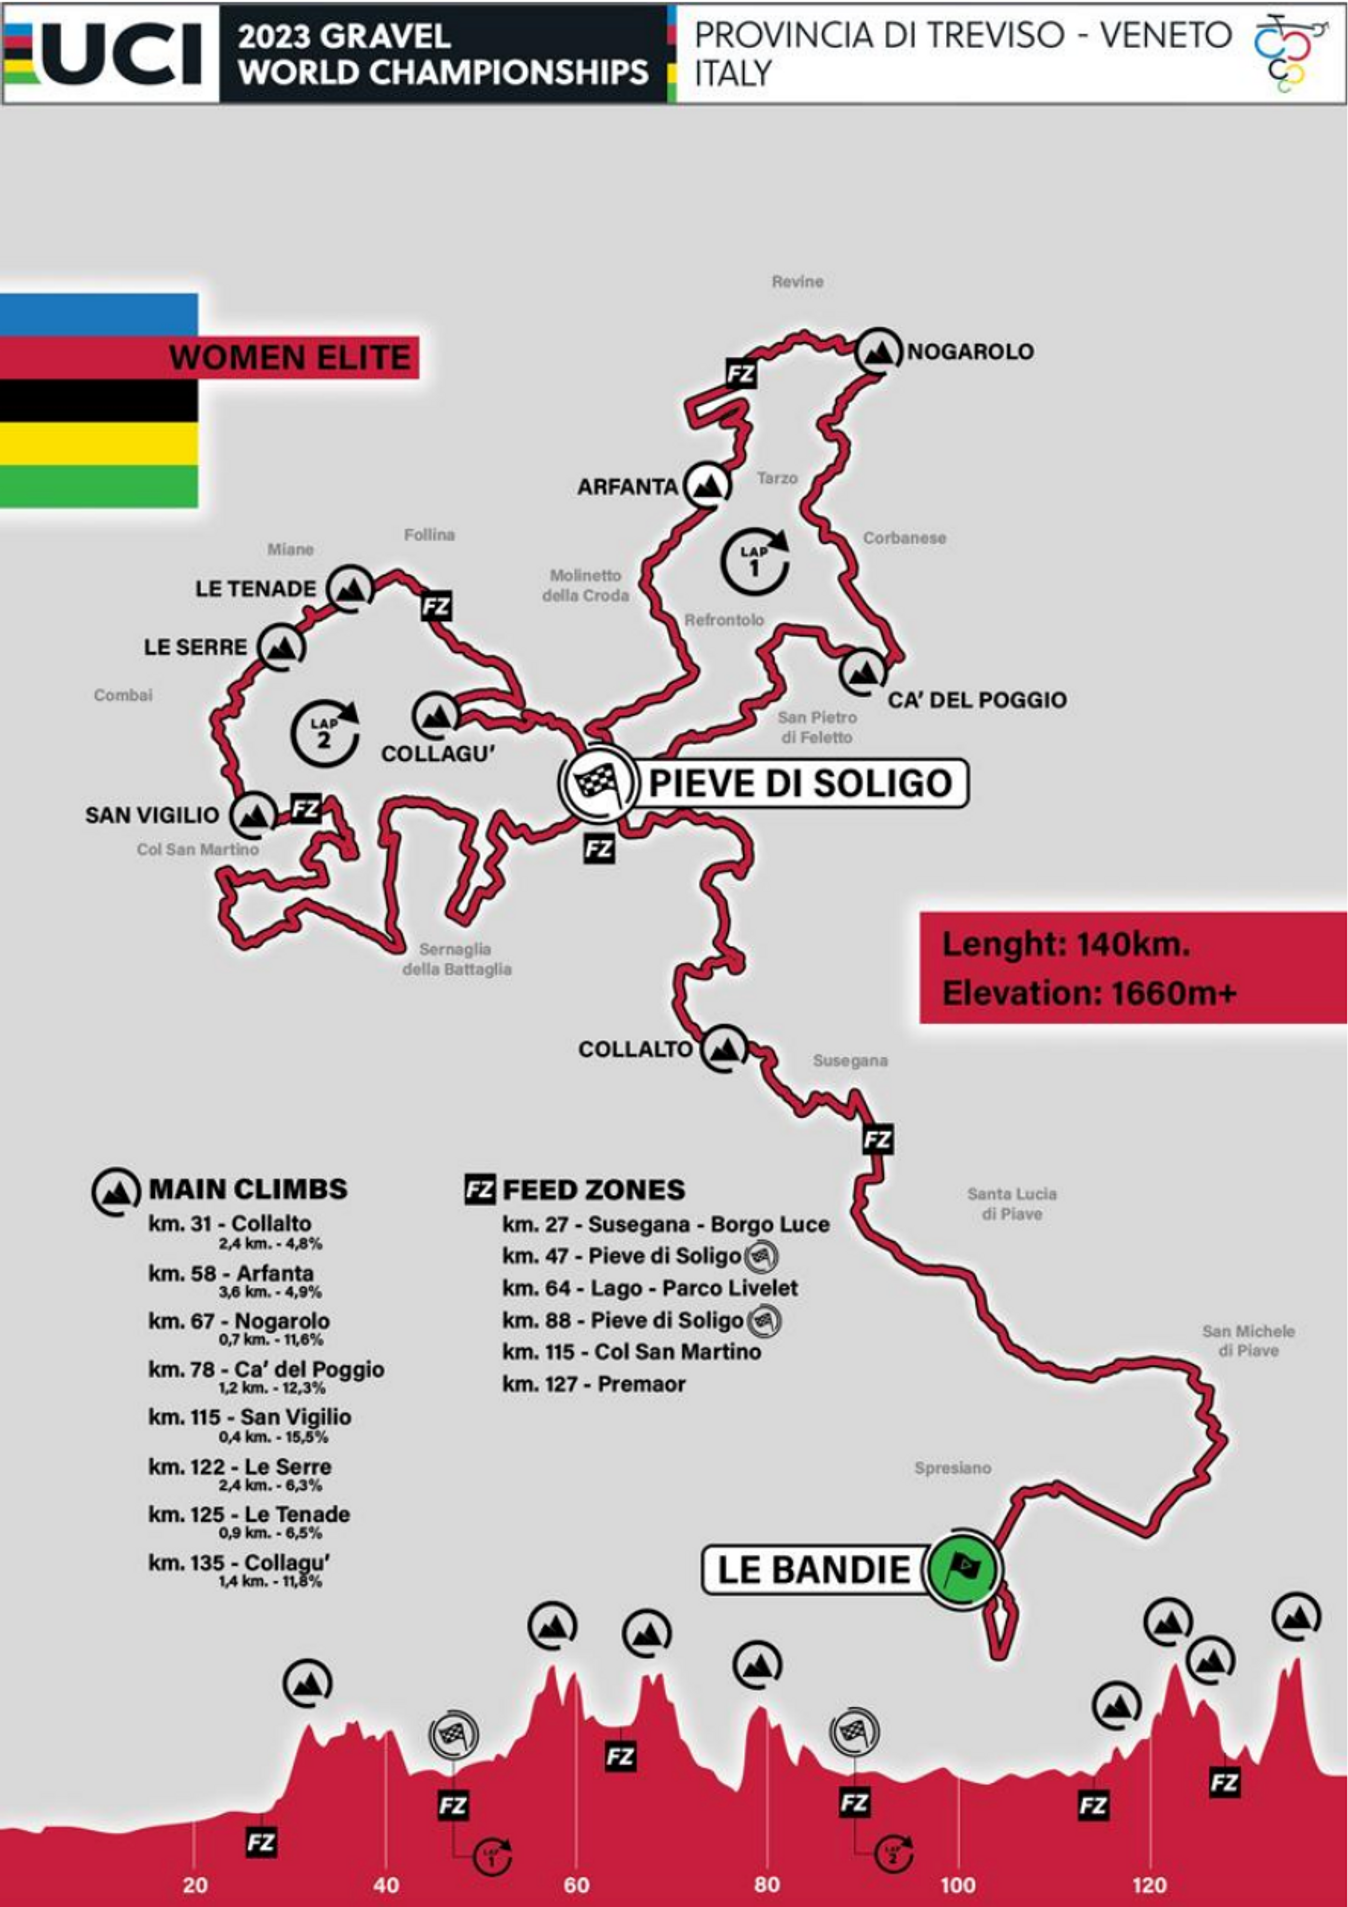 The women's race map and profile